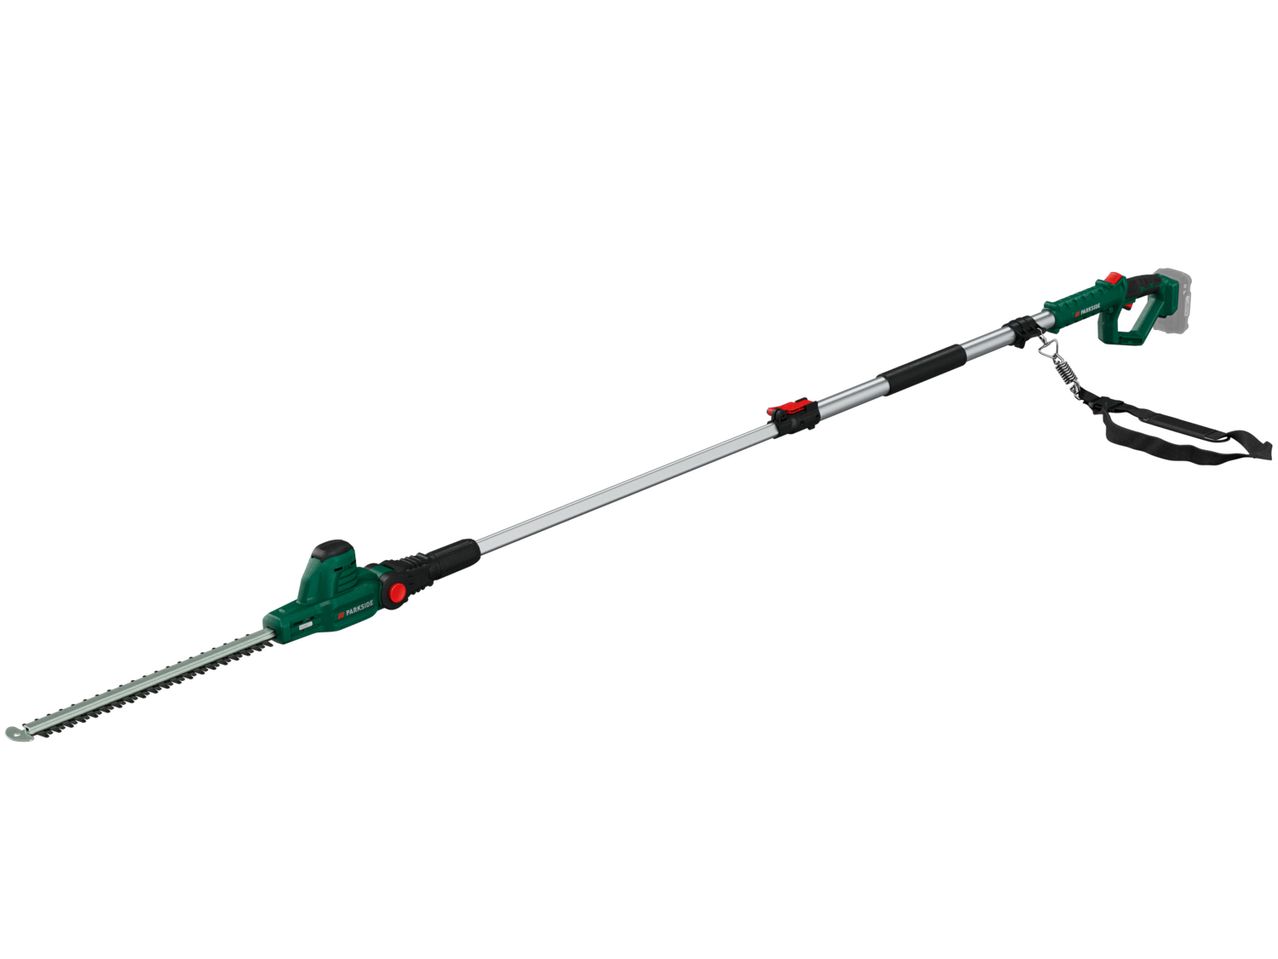 Go to full screen view: 20V Cordless Extendable Hedge Trimmer - Image 1